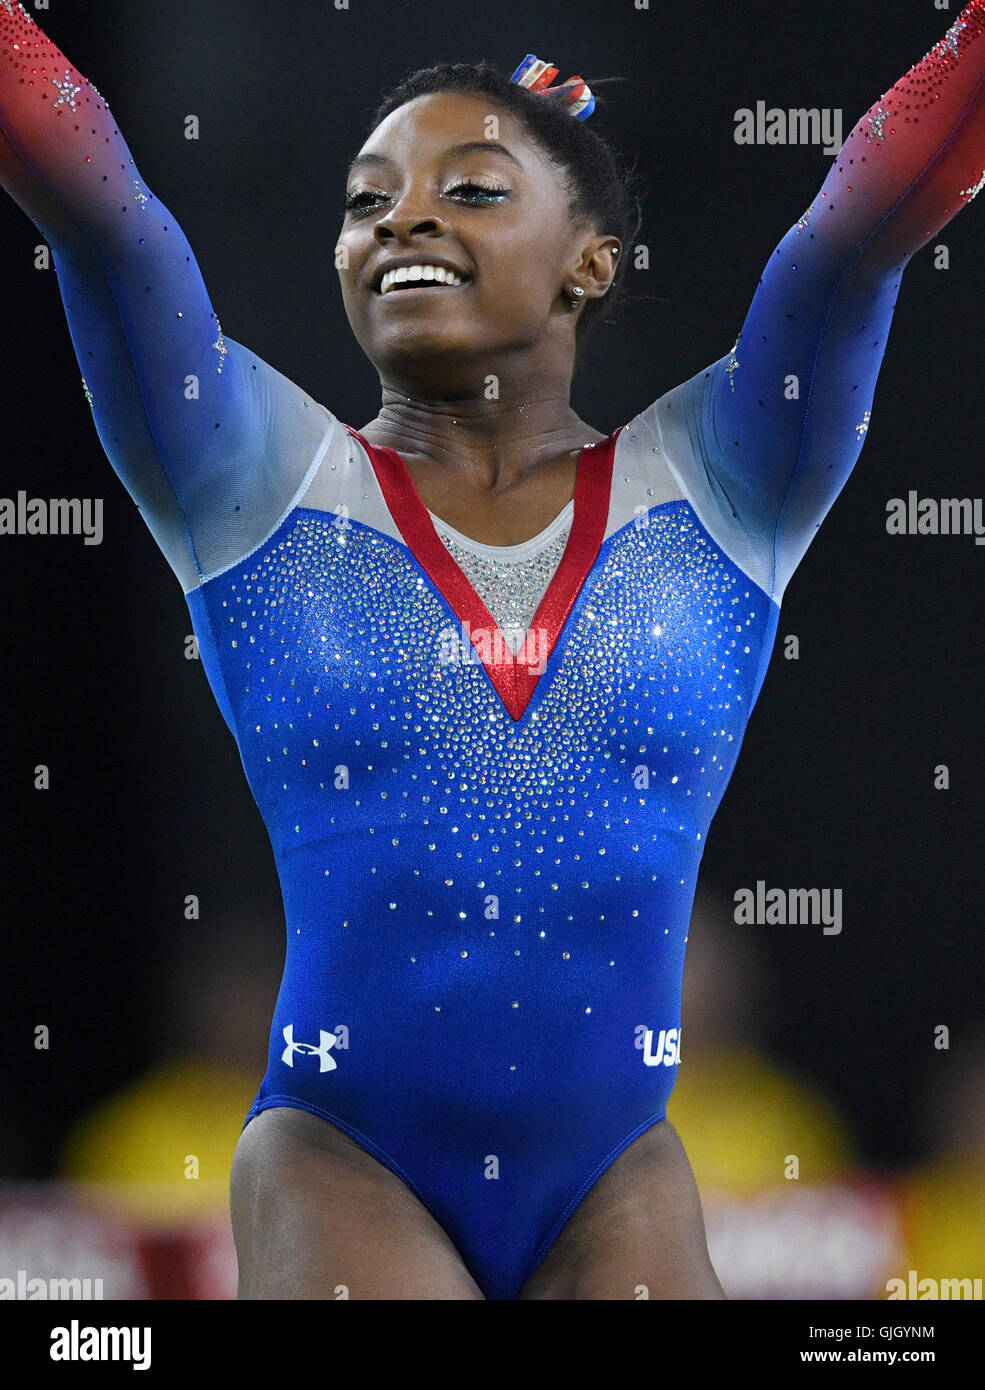 Rio de Janeiro, Brazil. 16th Aug, 2016. Simone Biles of the USA performs during the Women's Floor Exercise Final at the Artistic Gymnastics events of the Rio 2016 Olympic Games at the Rio Olympic Arena in Rio de Janeiro, Brazil, 16 August 2016. Photo: Soeren Stache/dpa/Alamy Live News Stock Photo